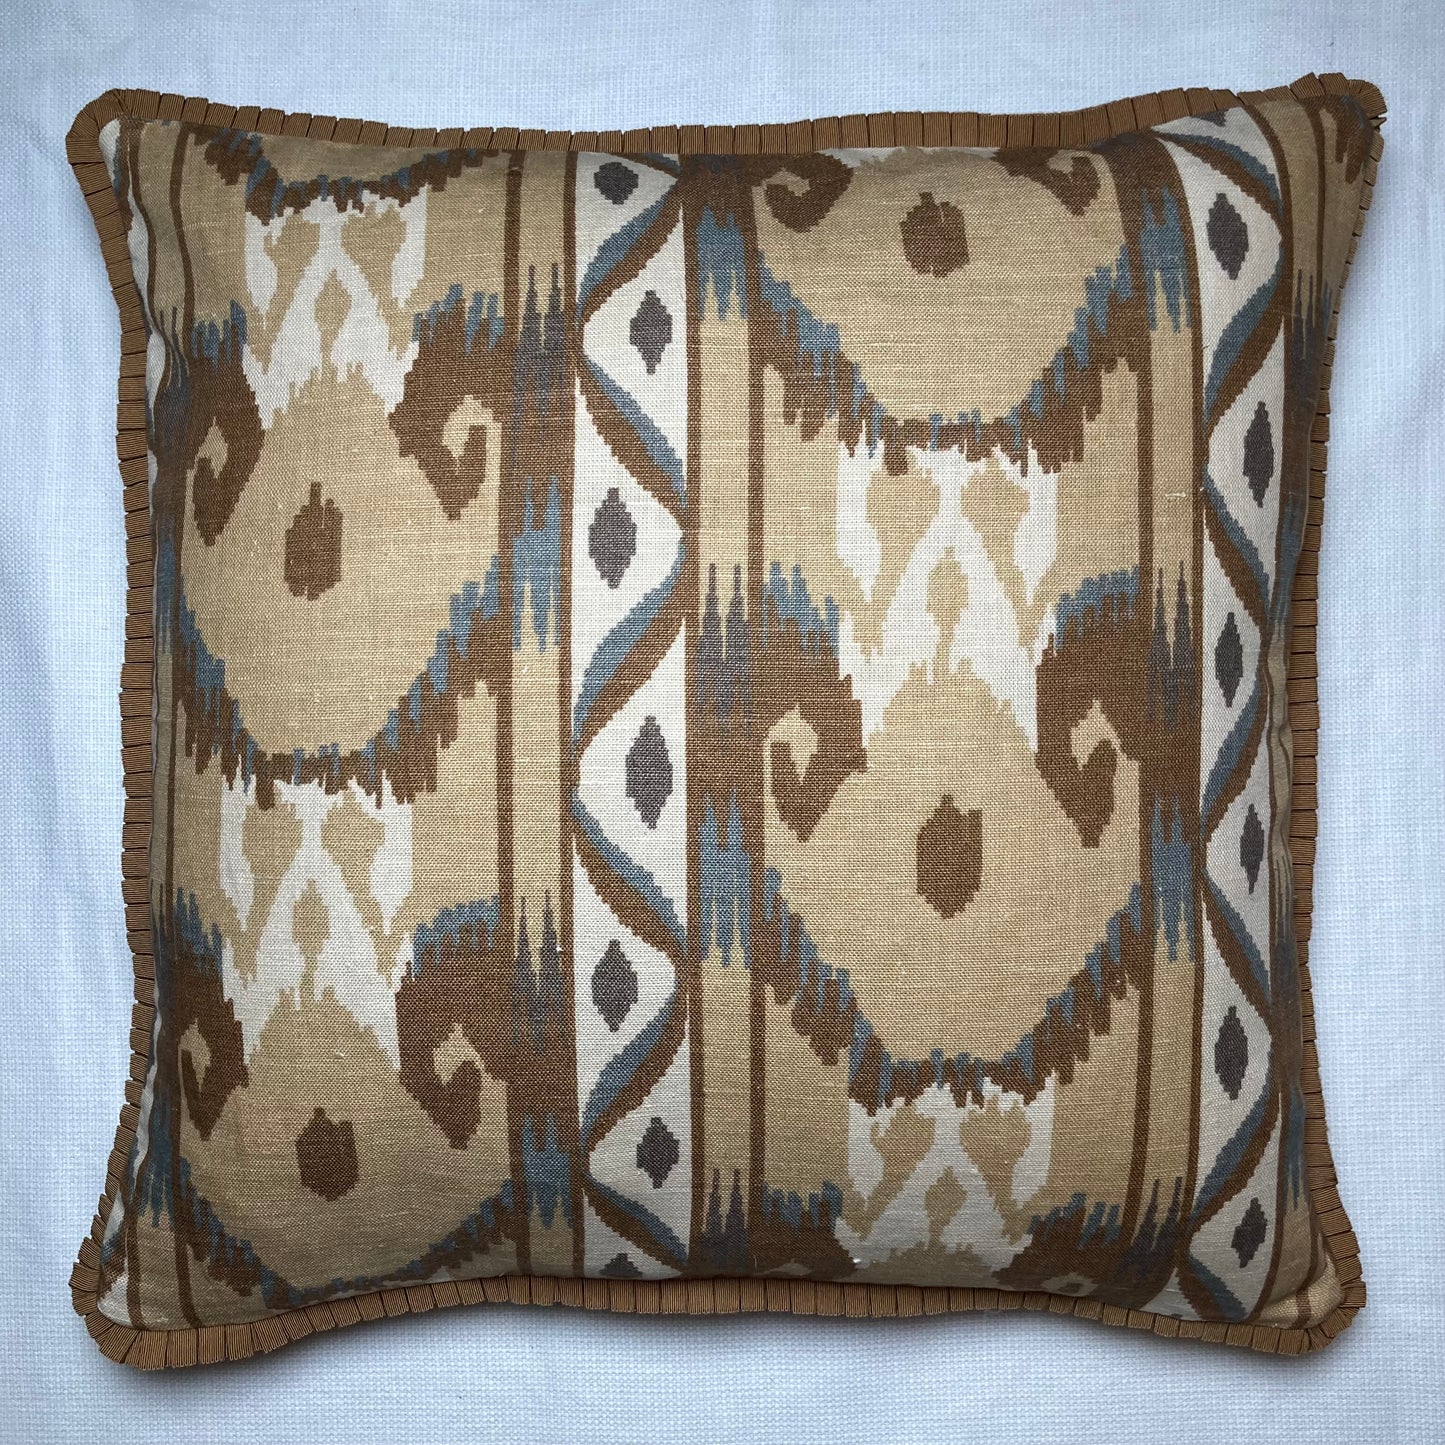 Middle Eastern Tribal Motif 21 x 21 Square Designer Pillow Front with Down Feather Insert